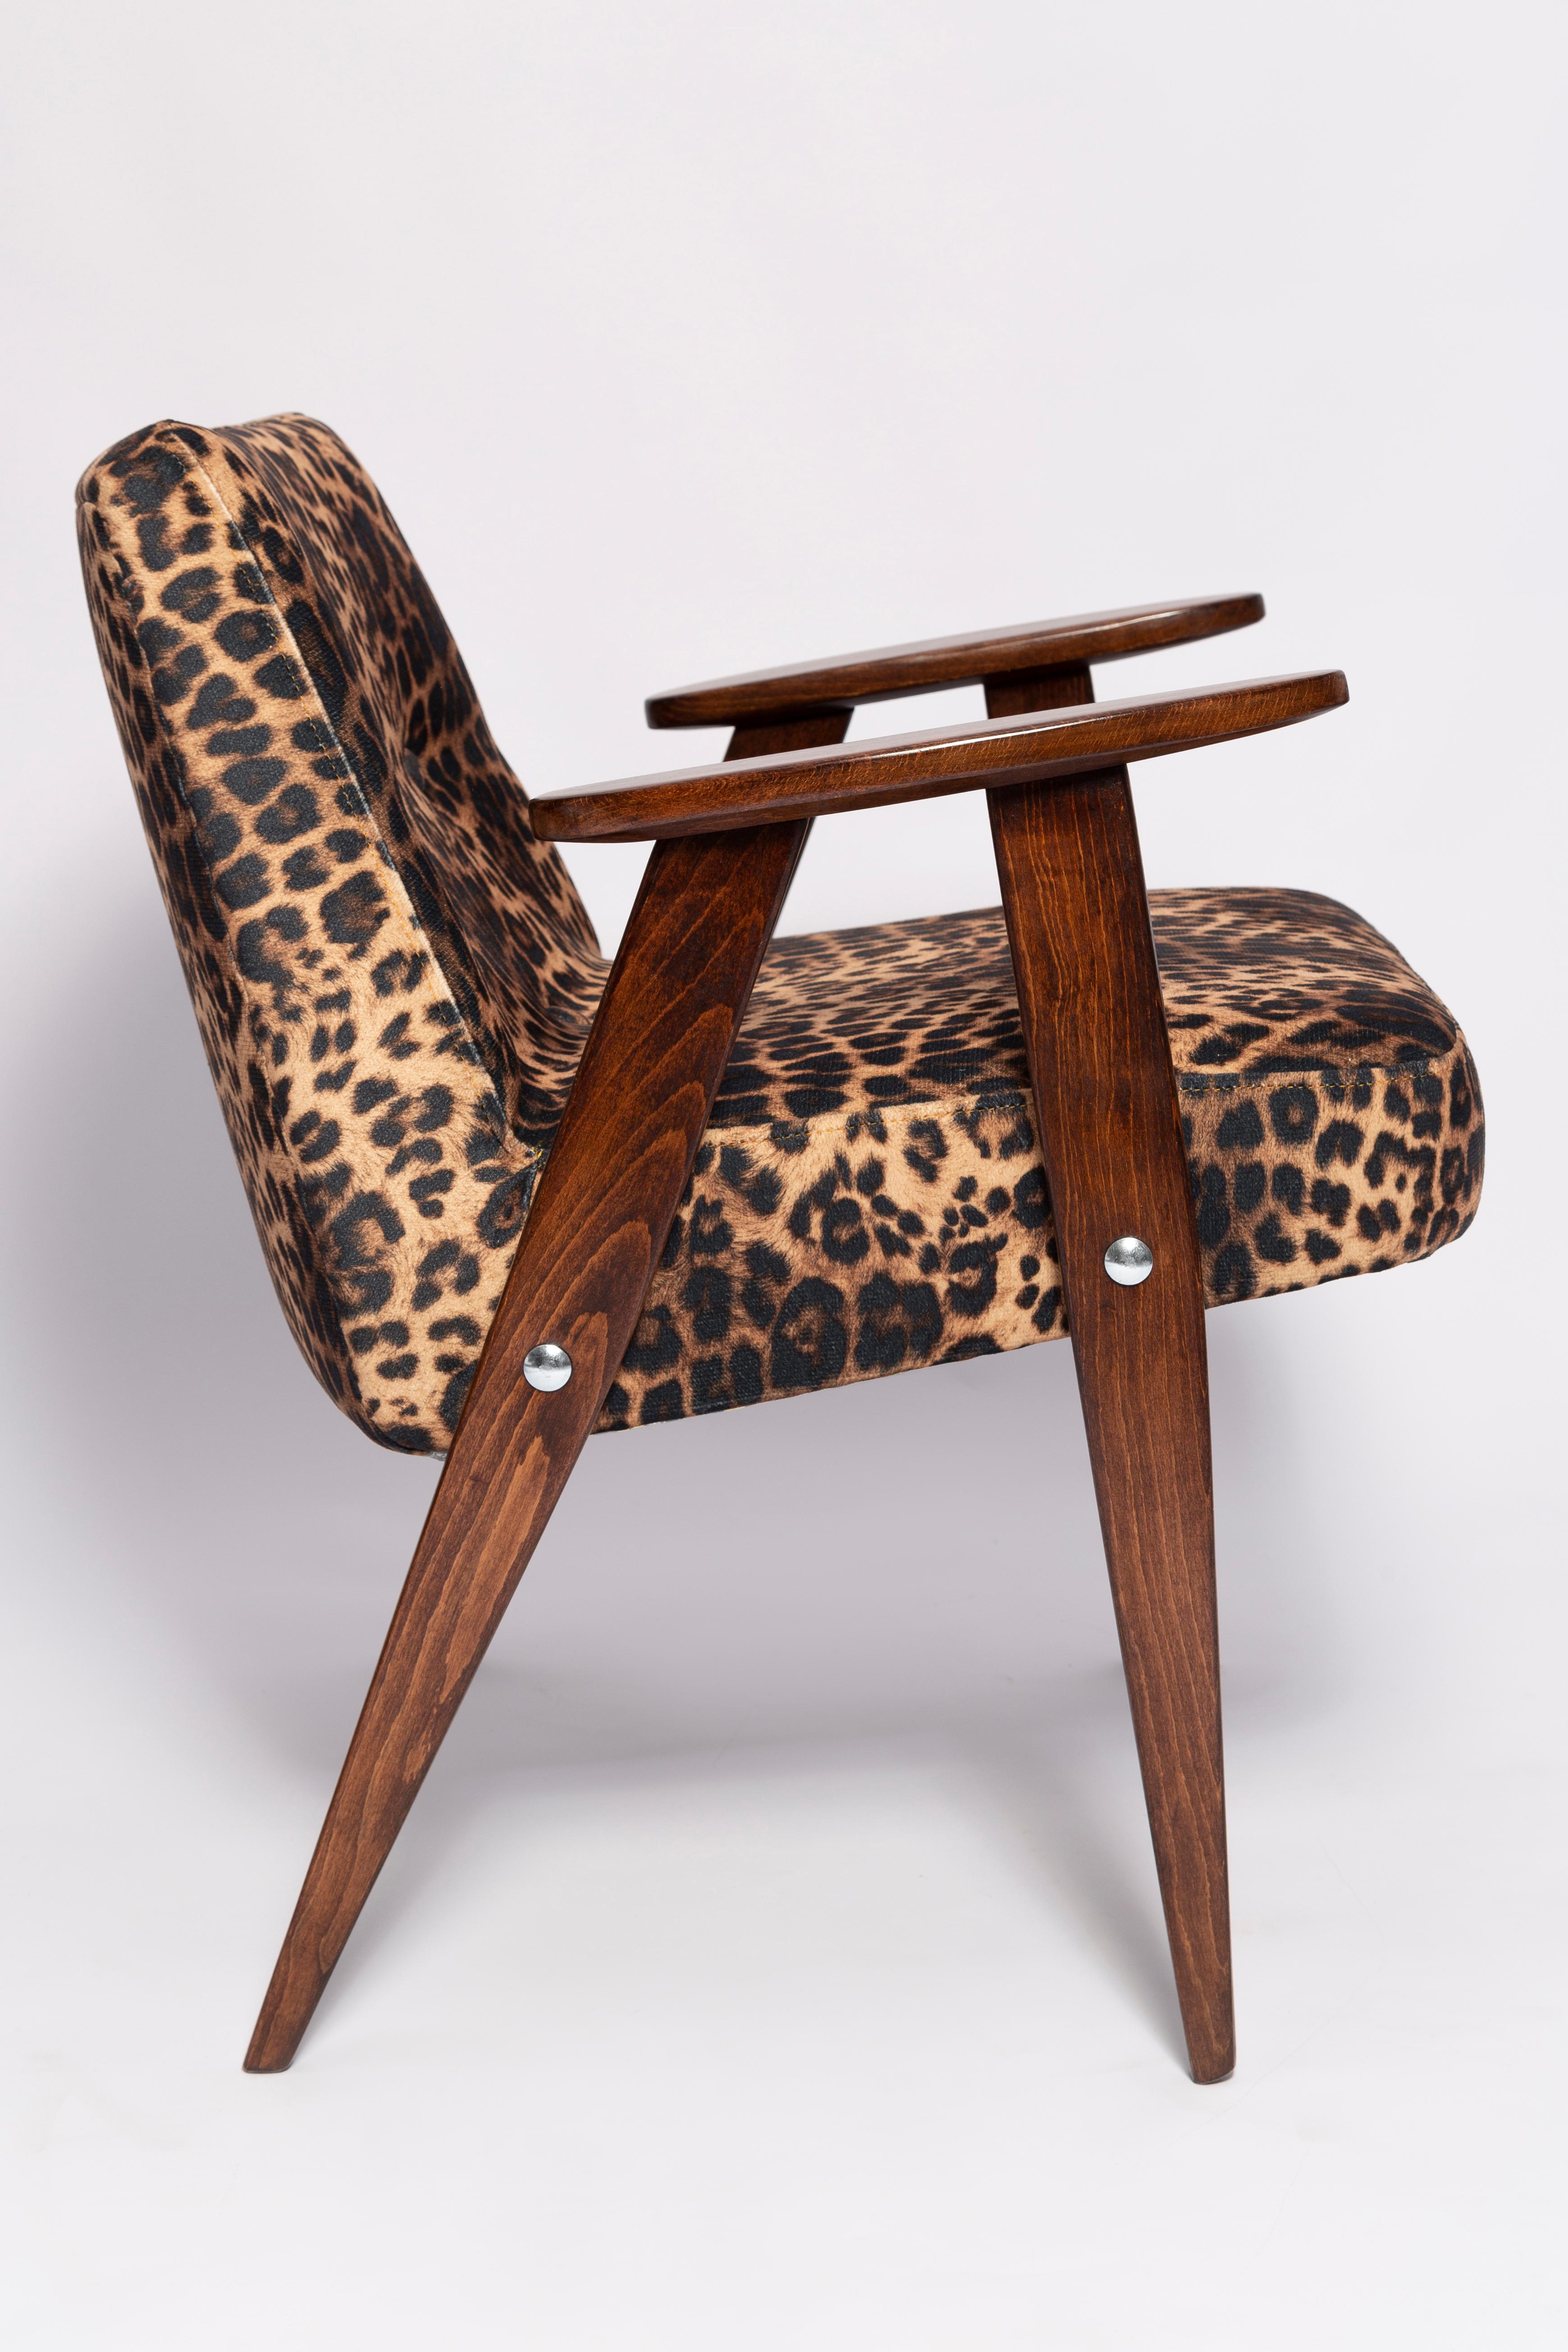 20th Century Mid Century 366 Armchair in Leopard Print Velvet, Jozef Chierowski, Europe 1960s For Sale